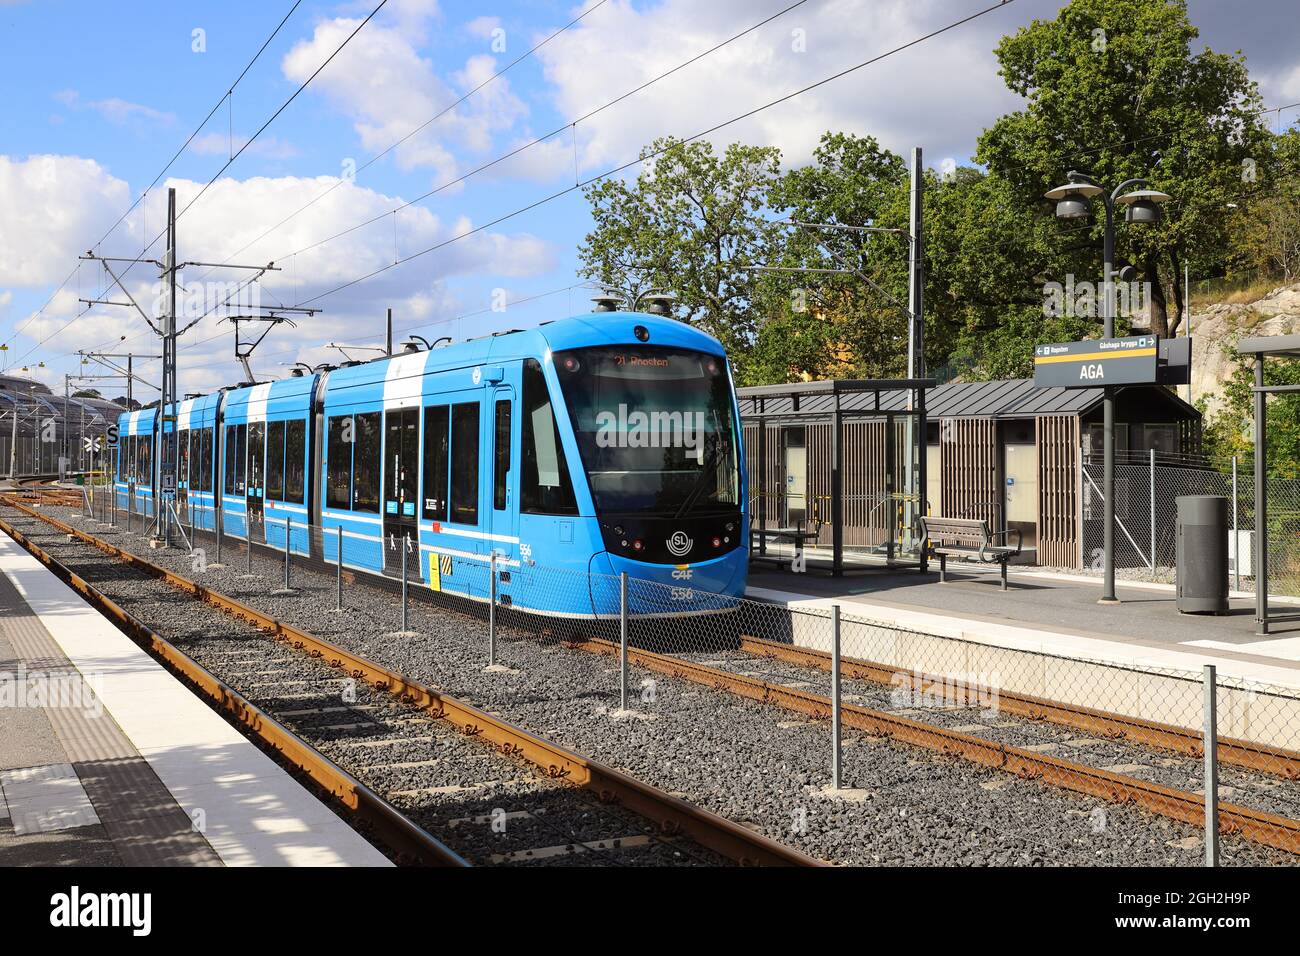 Lidingo, Sweden - August 30, 2021: Blue class A36 tram at the Aga stop on the Lidigobanan service. Stock Photo